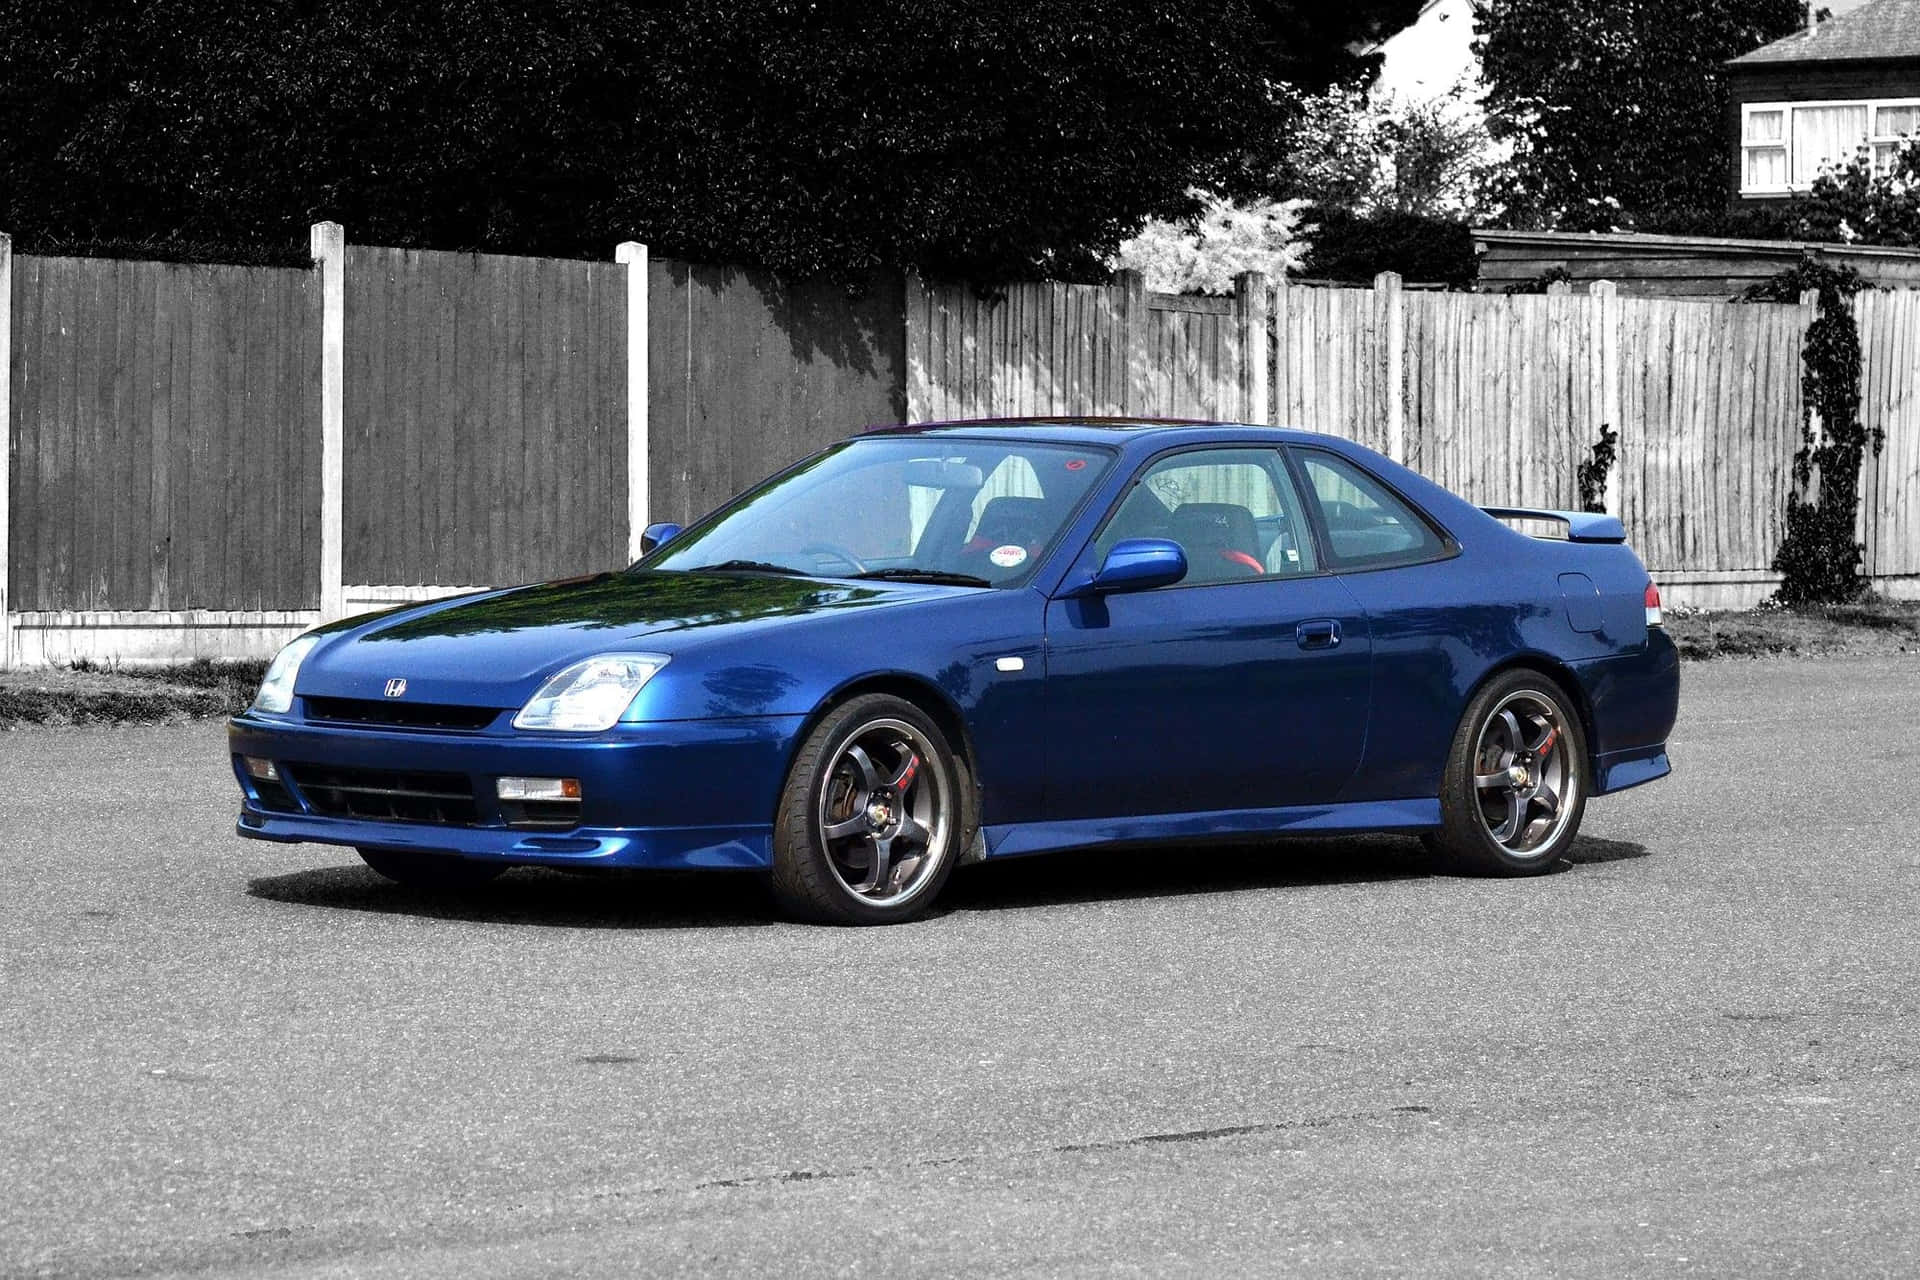 Sleek and Stylish Honda Prelude in Action Wallpaper